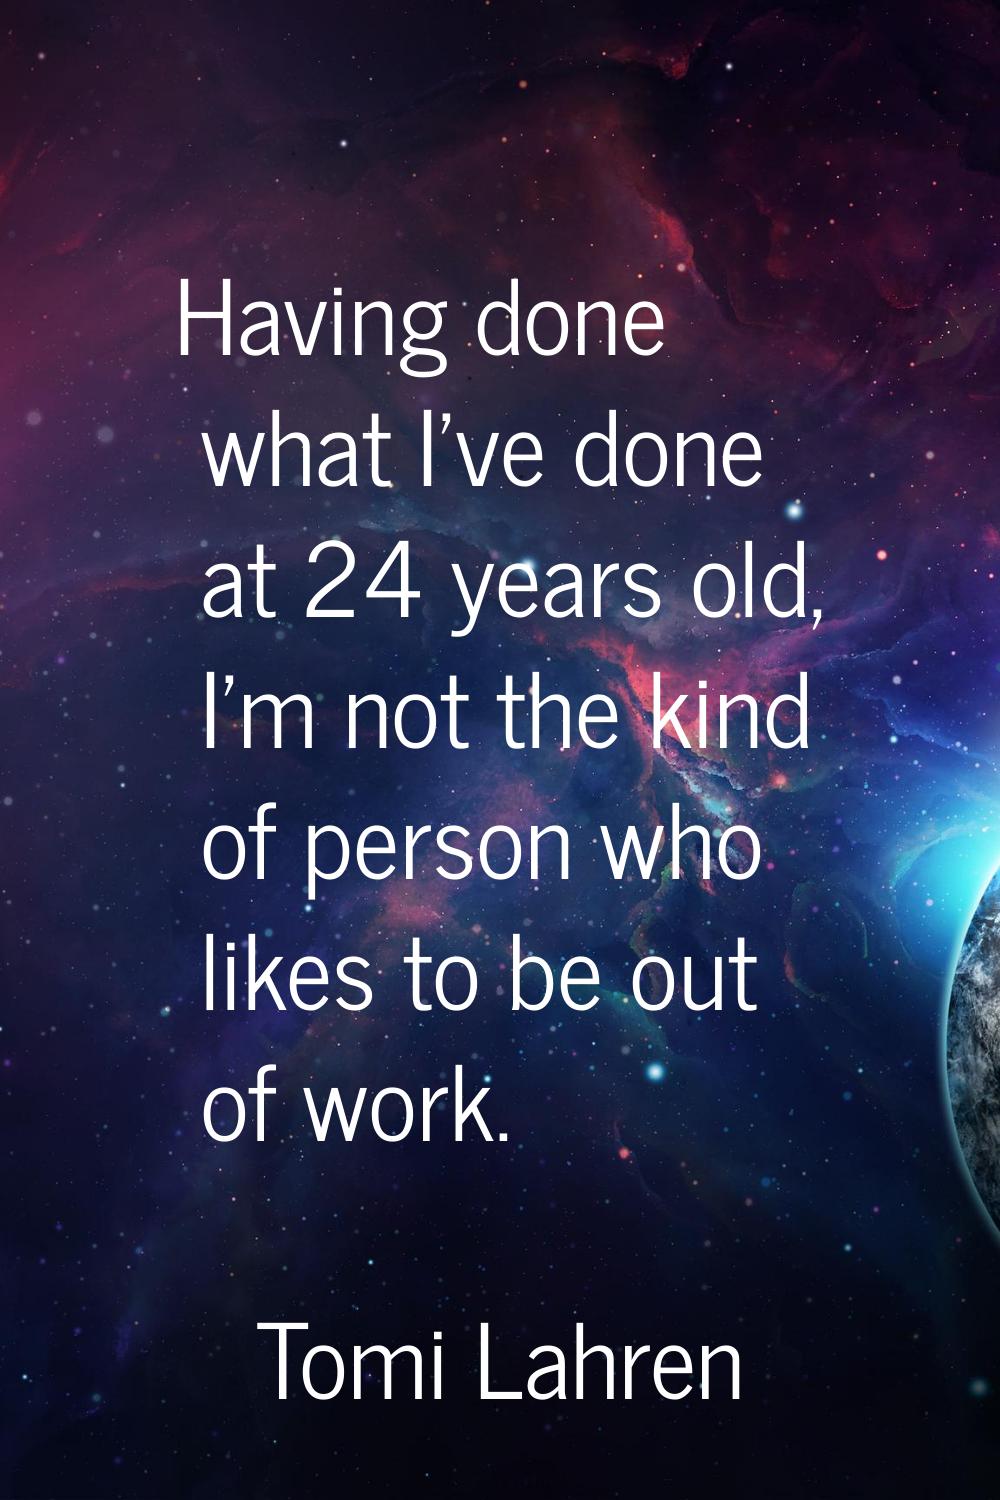 Having done what I've done at 24 years old, I'm not the kind of person who likes to be out of work.